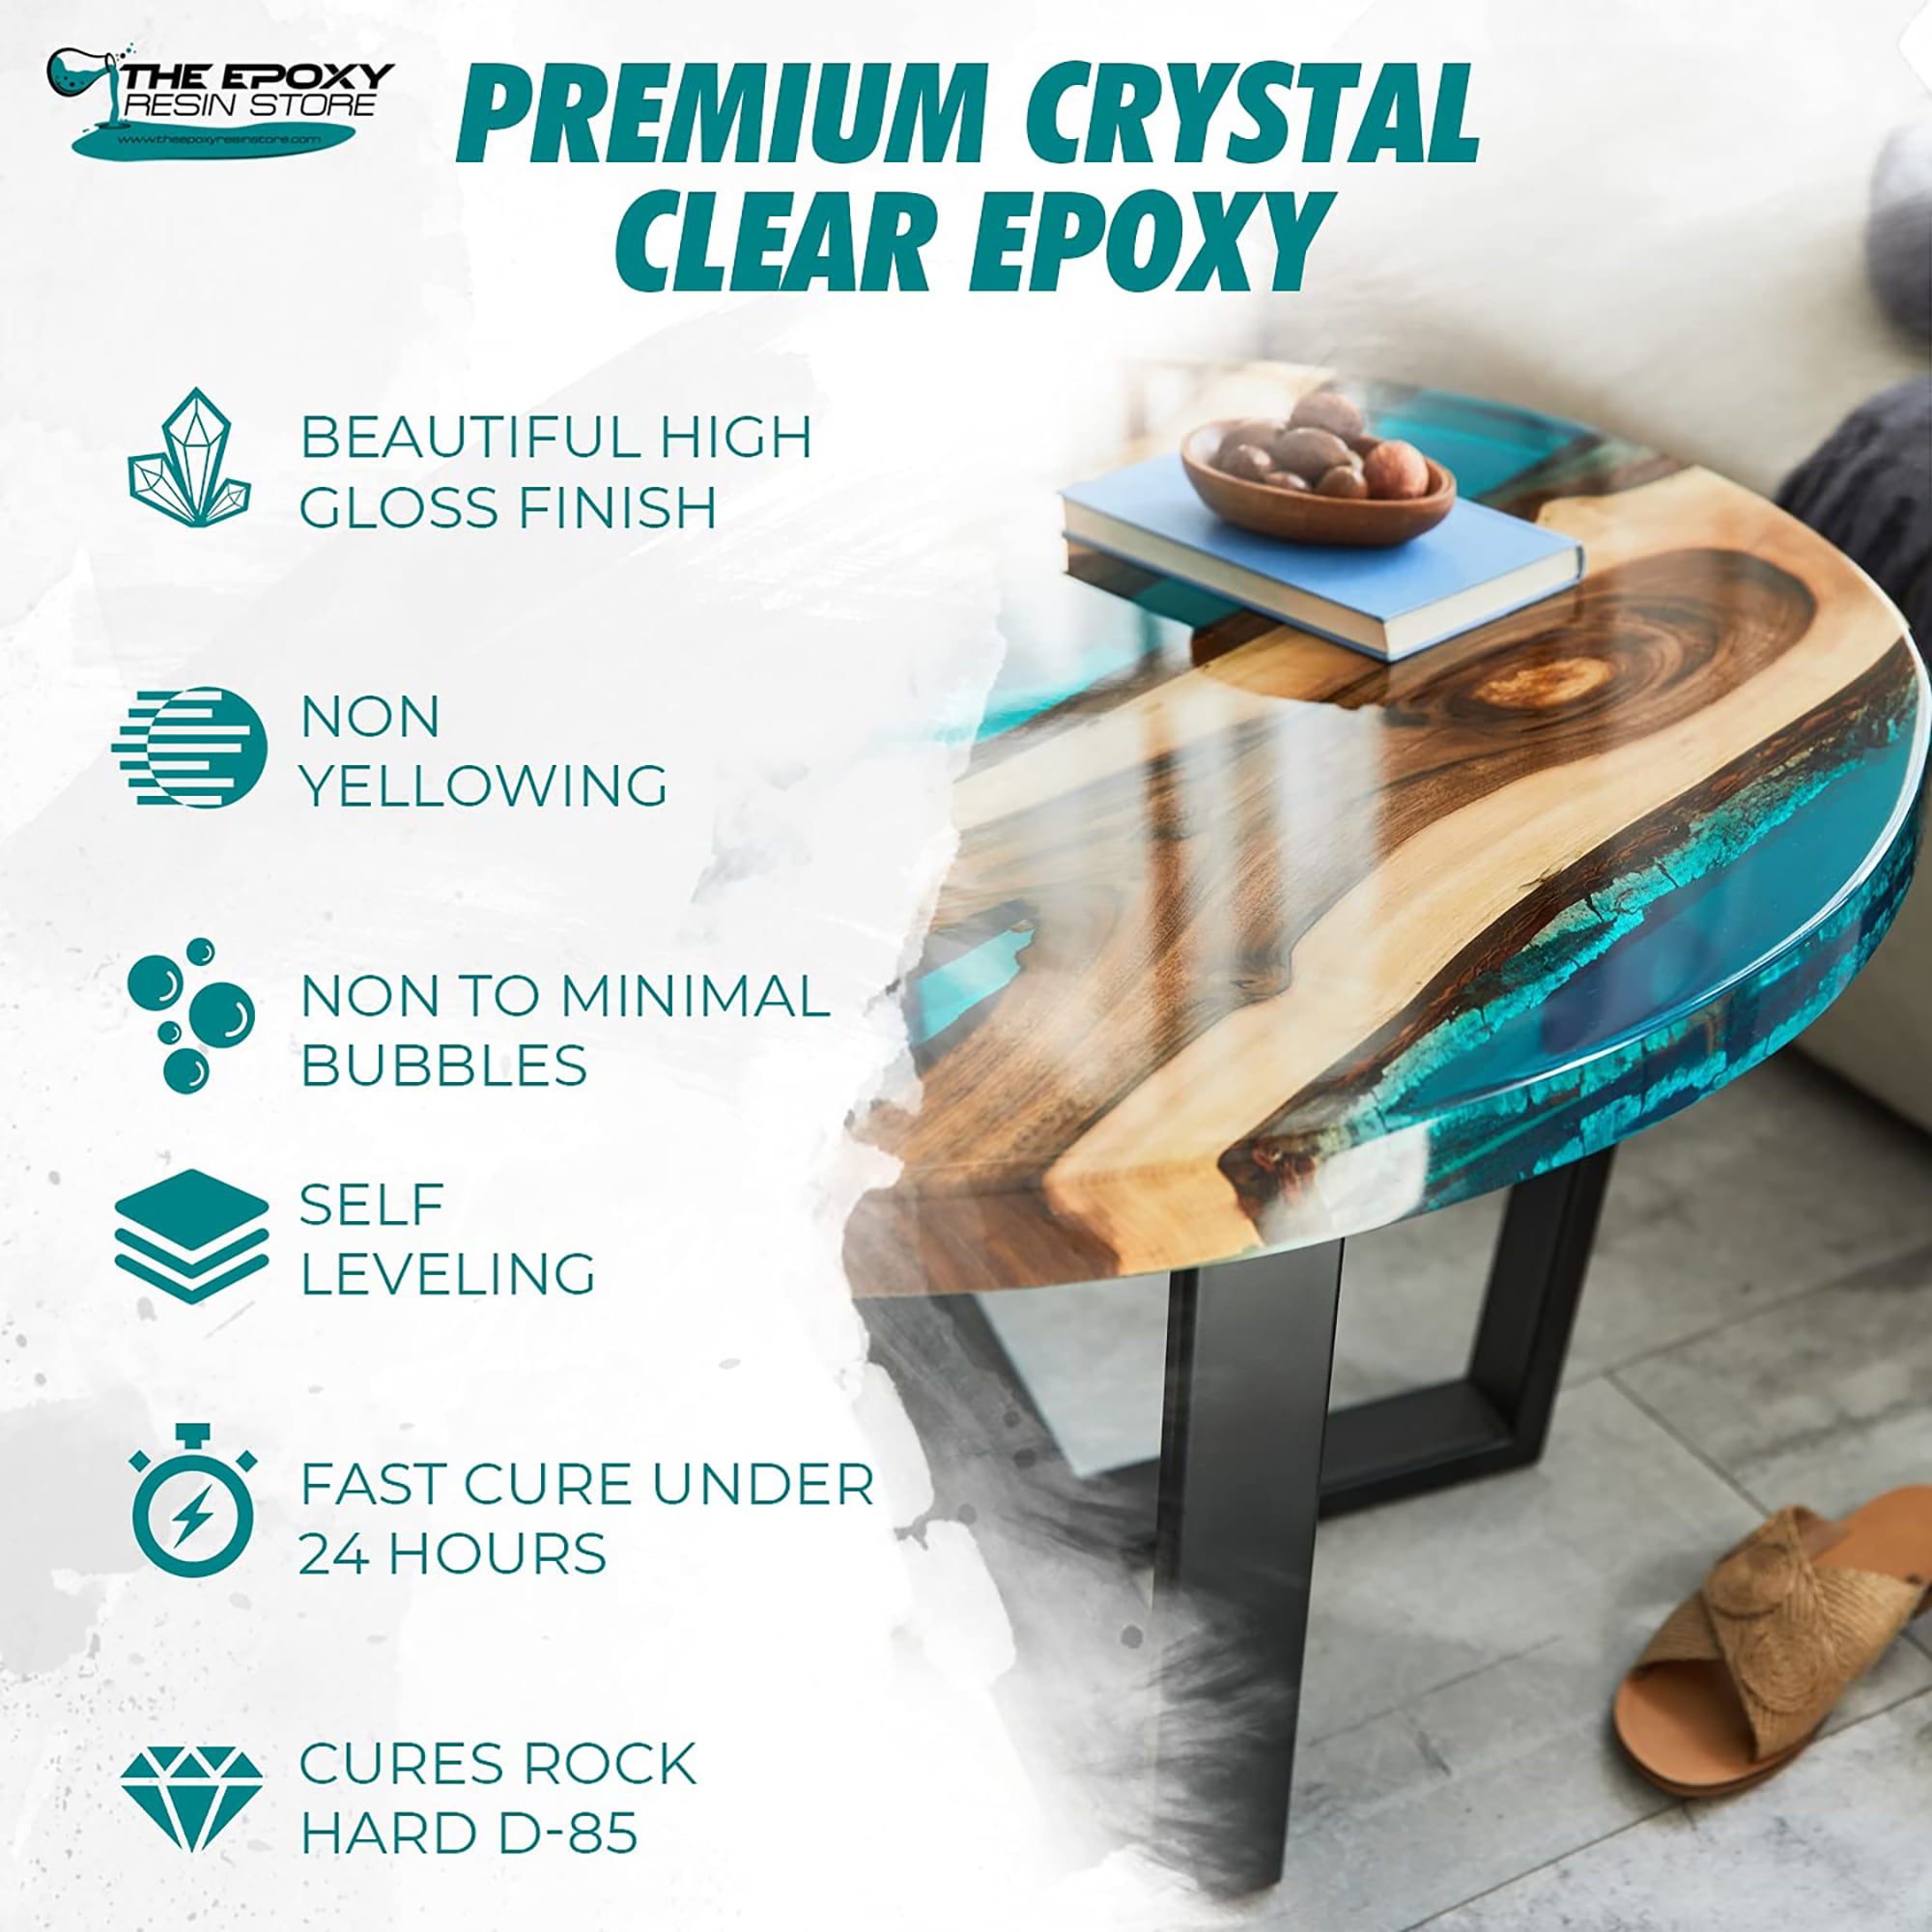 Epoxy Resin Crystal Clear 2 Part Kit for Super Gloss Finish - General Use  Clear Epoxy Resin The – The Epoxy Resin Store